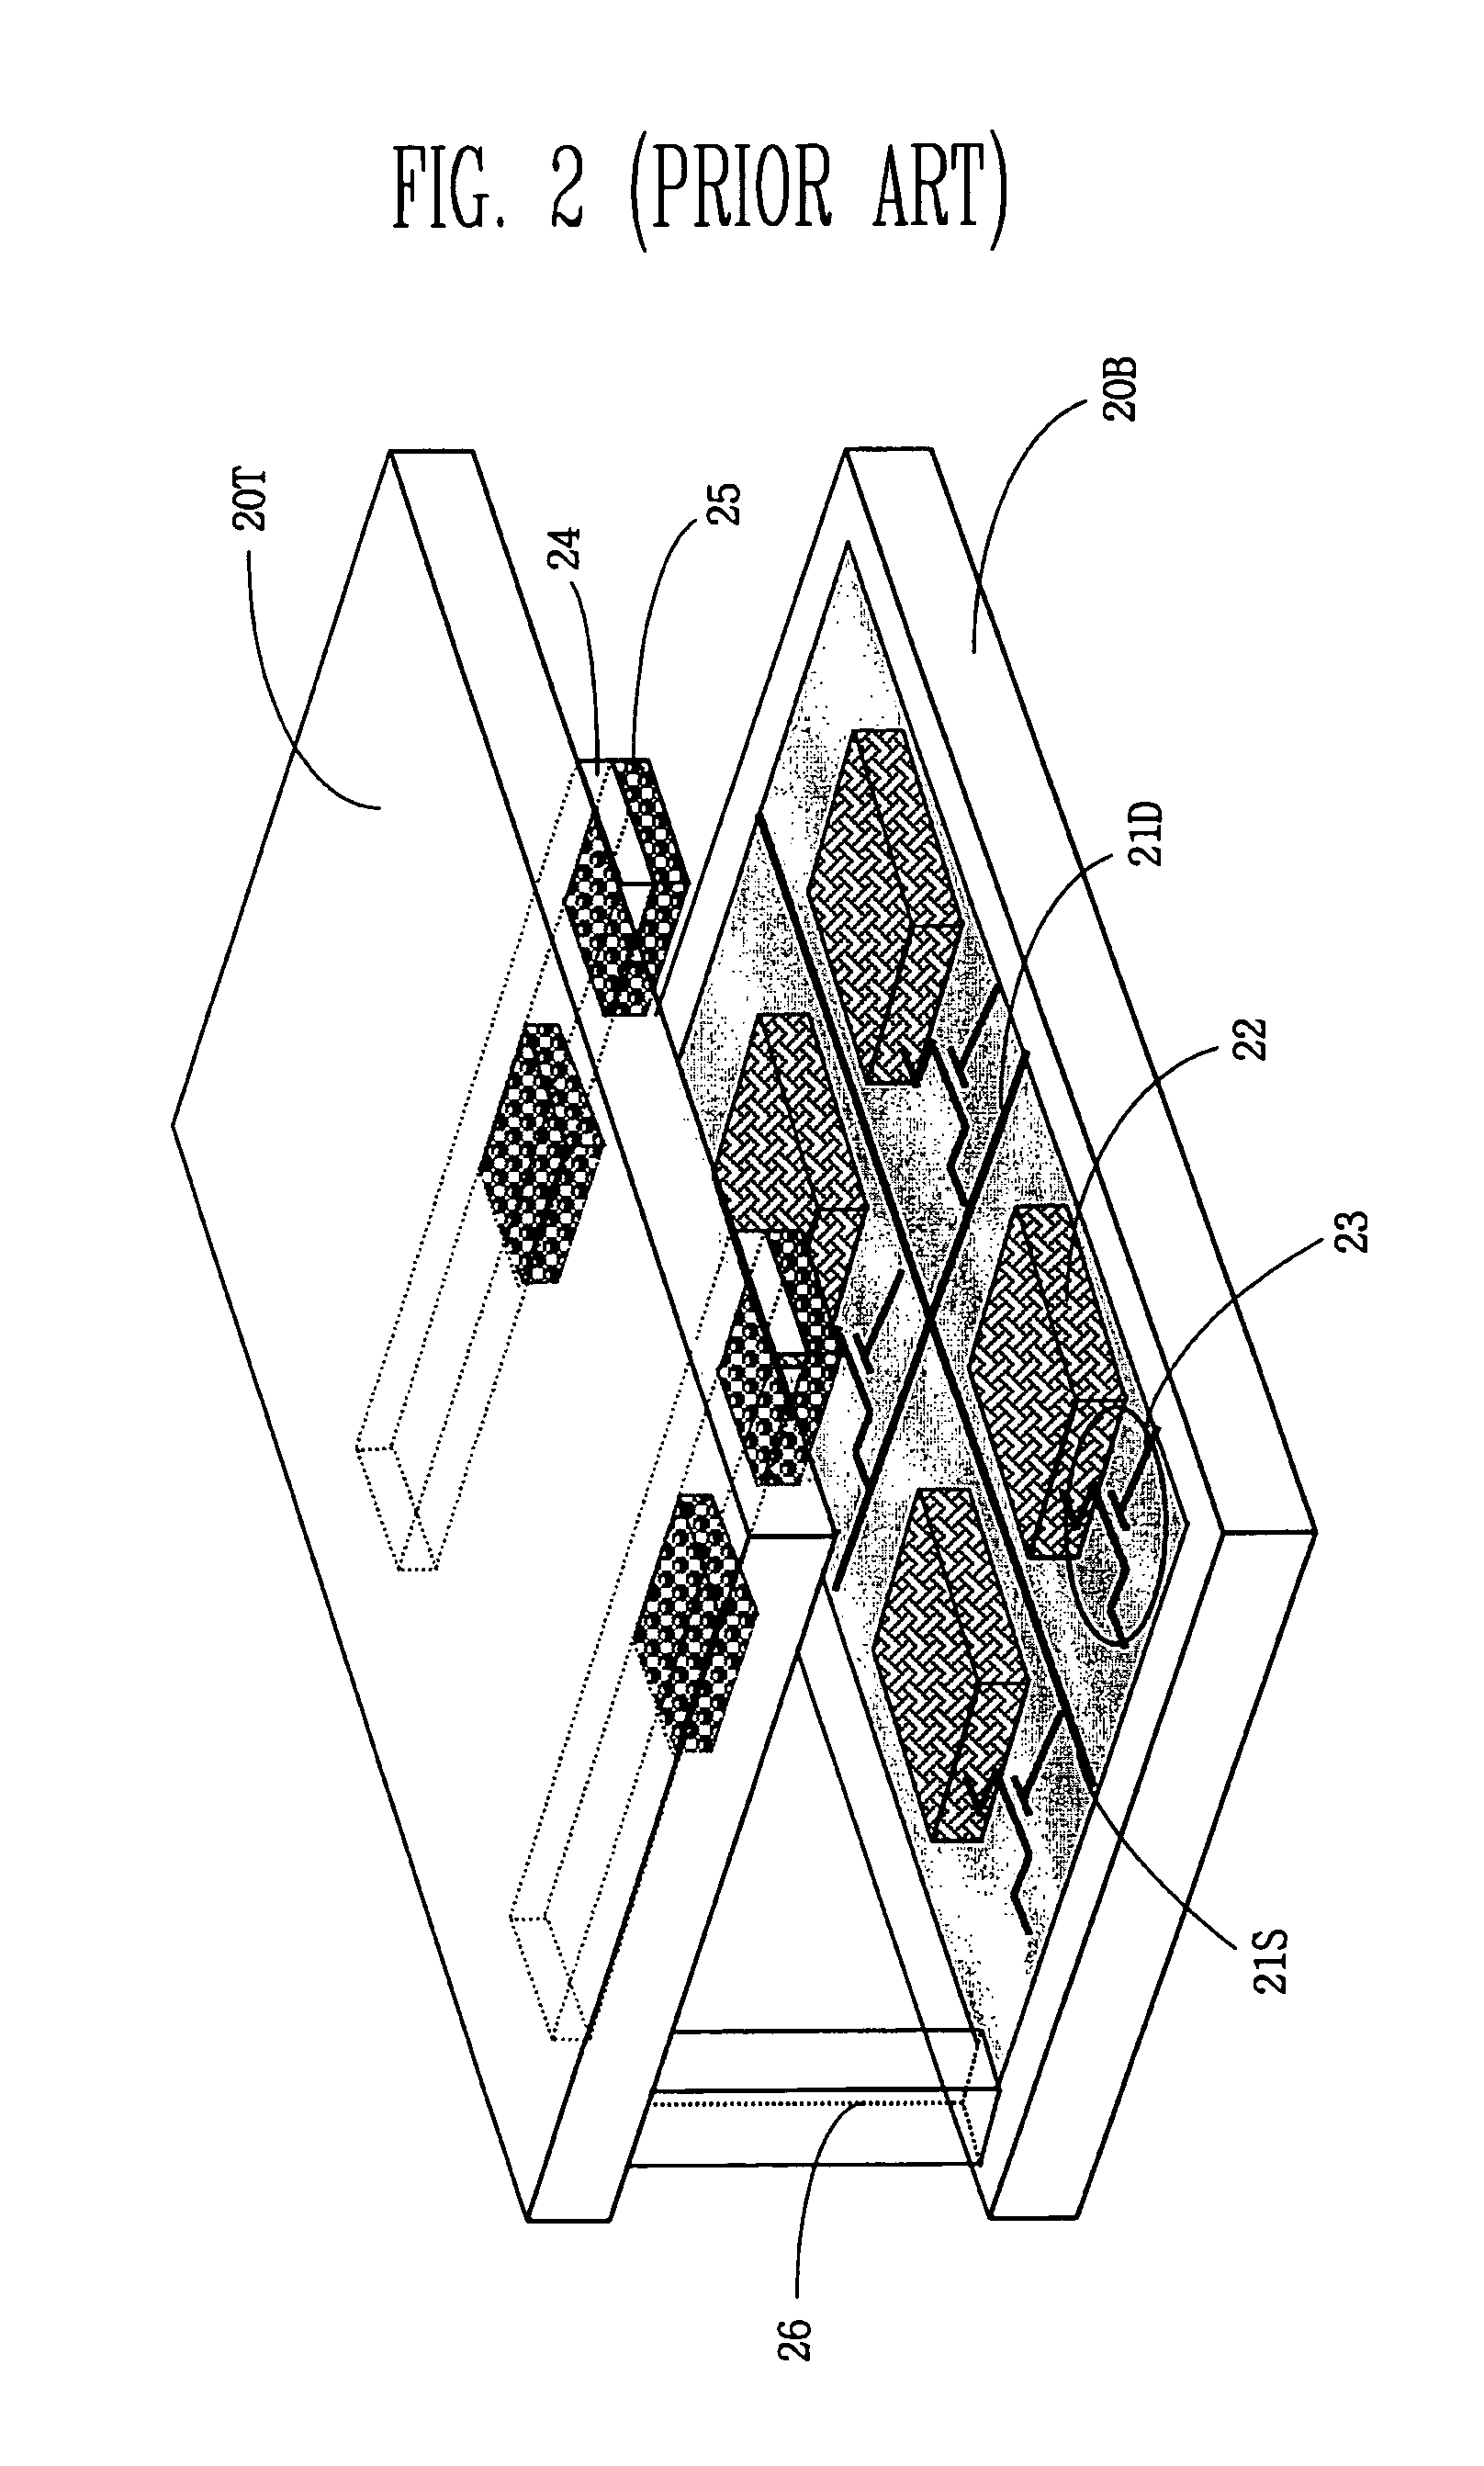 Field emission display in which a field emission device is applied to a flat display